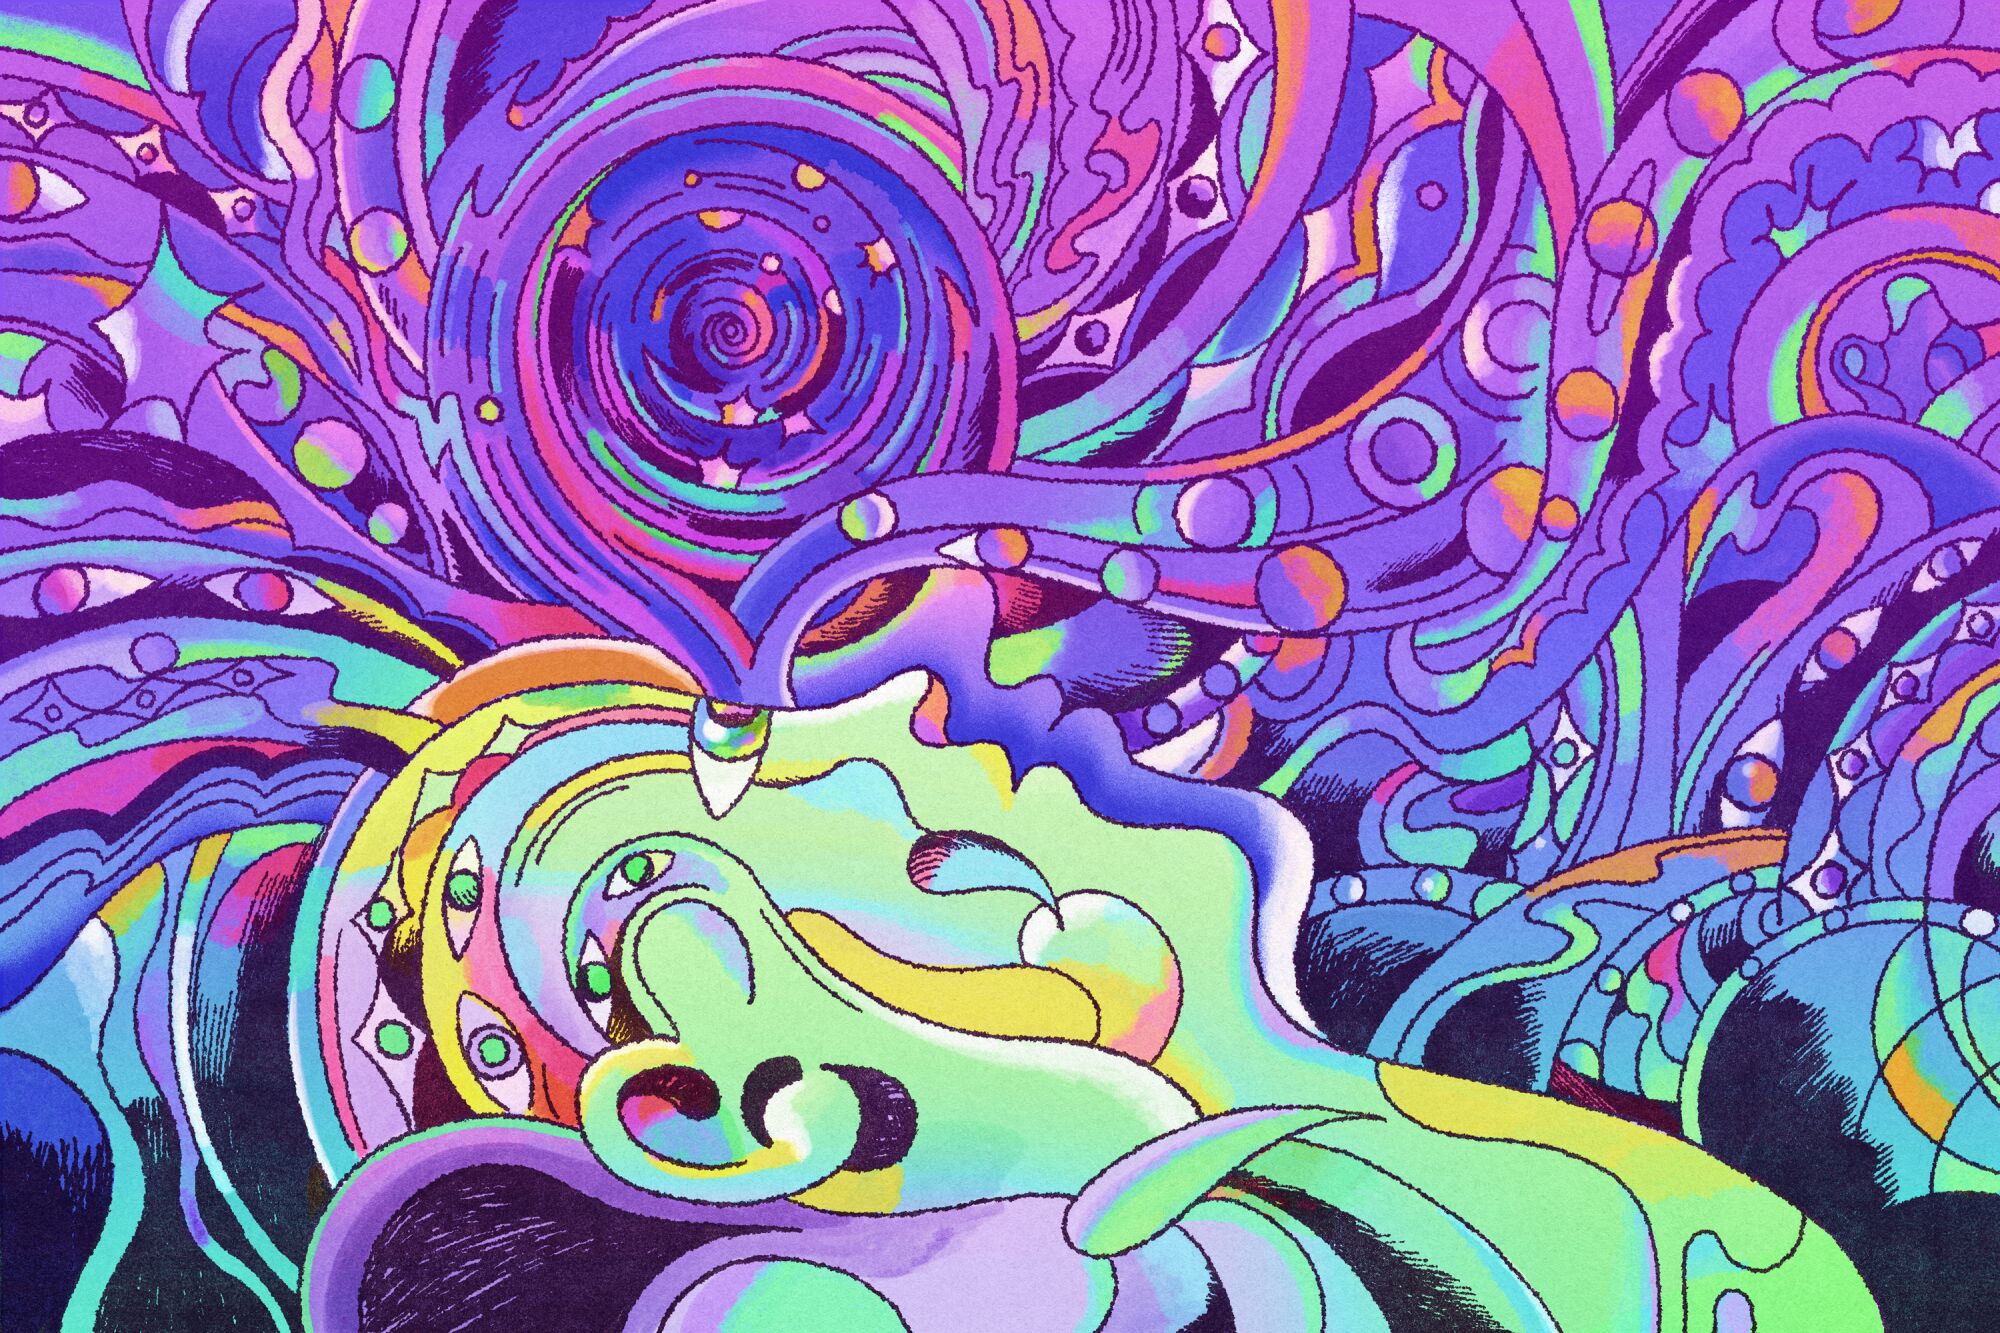 Illustration of a psychedelic person with purple and green swirls coming out of the eyes.